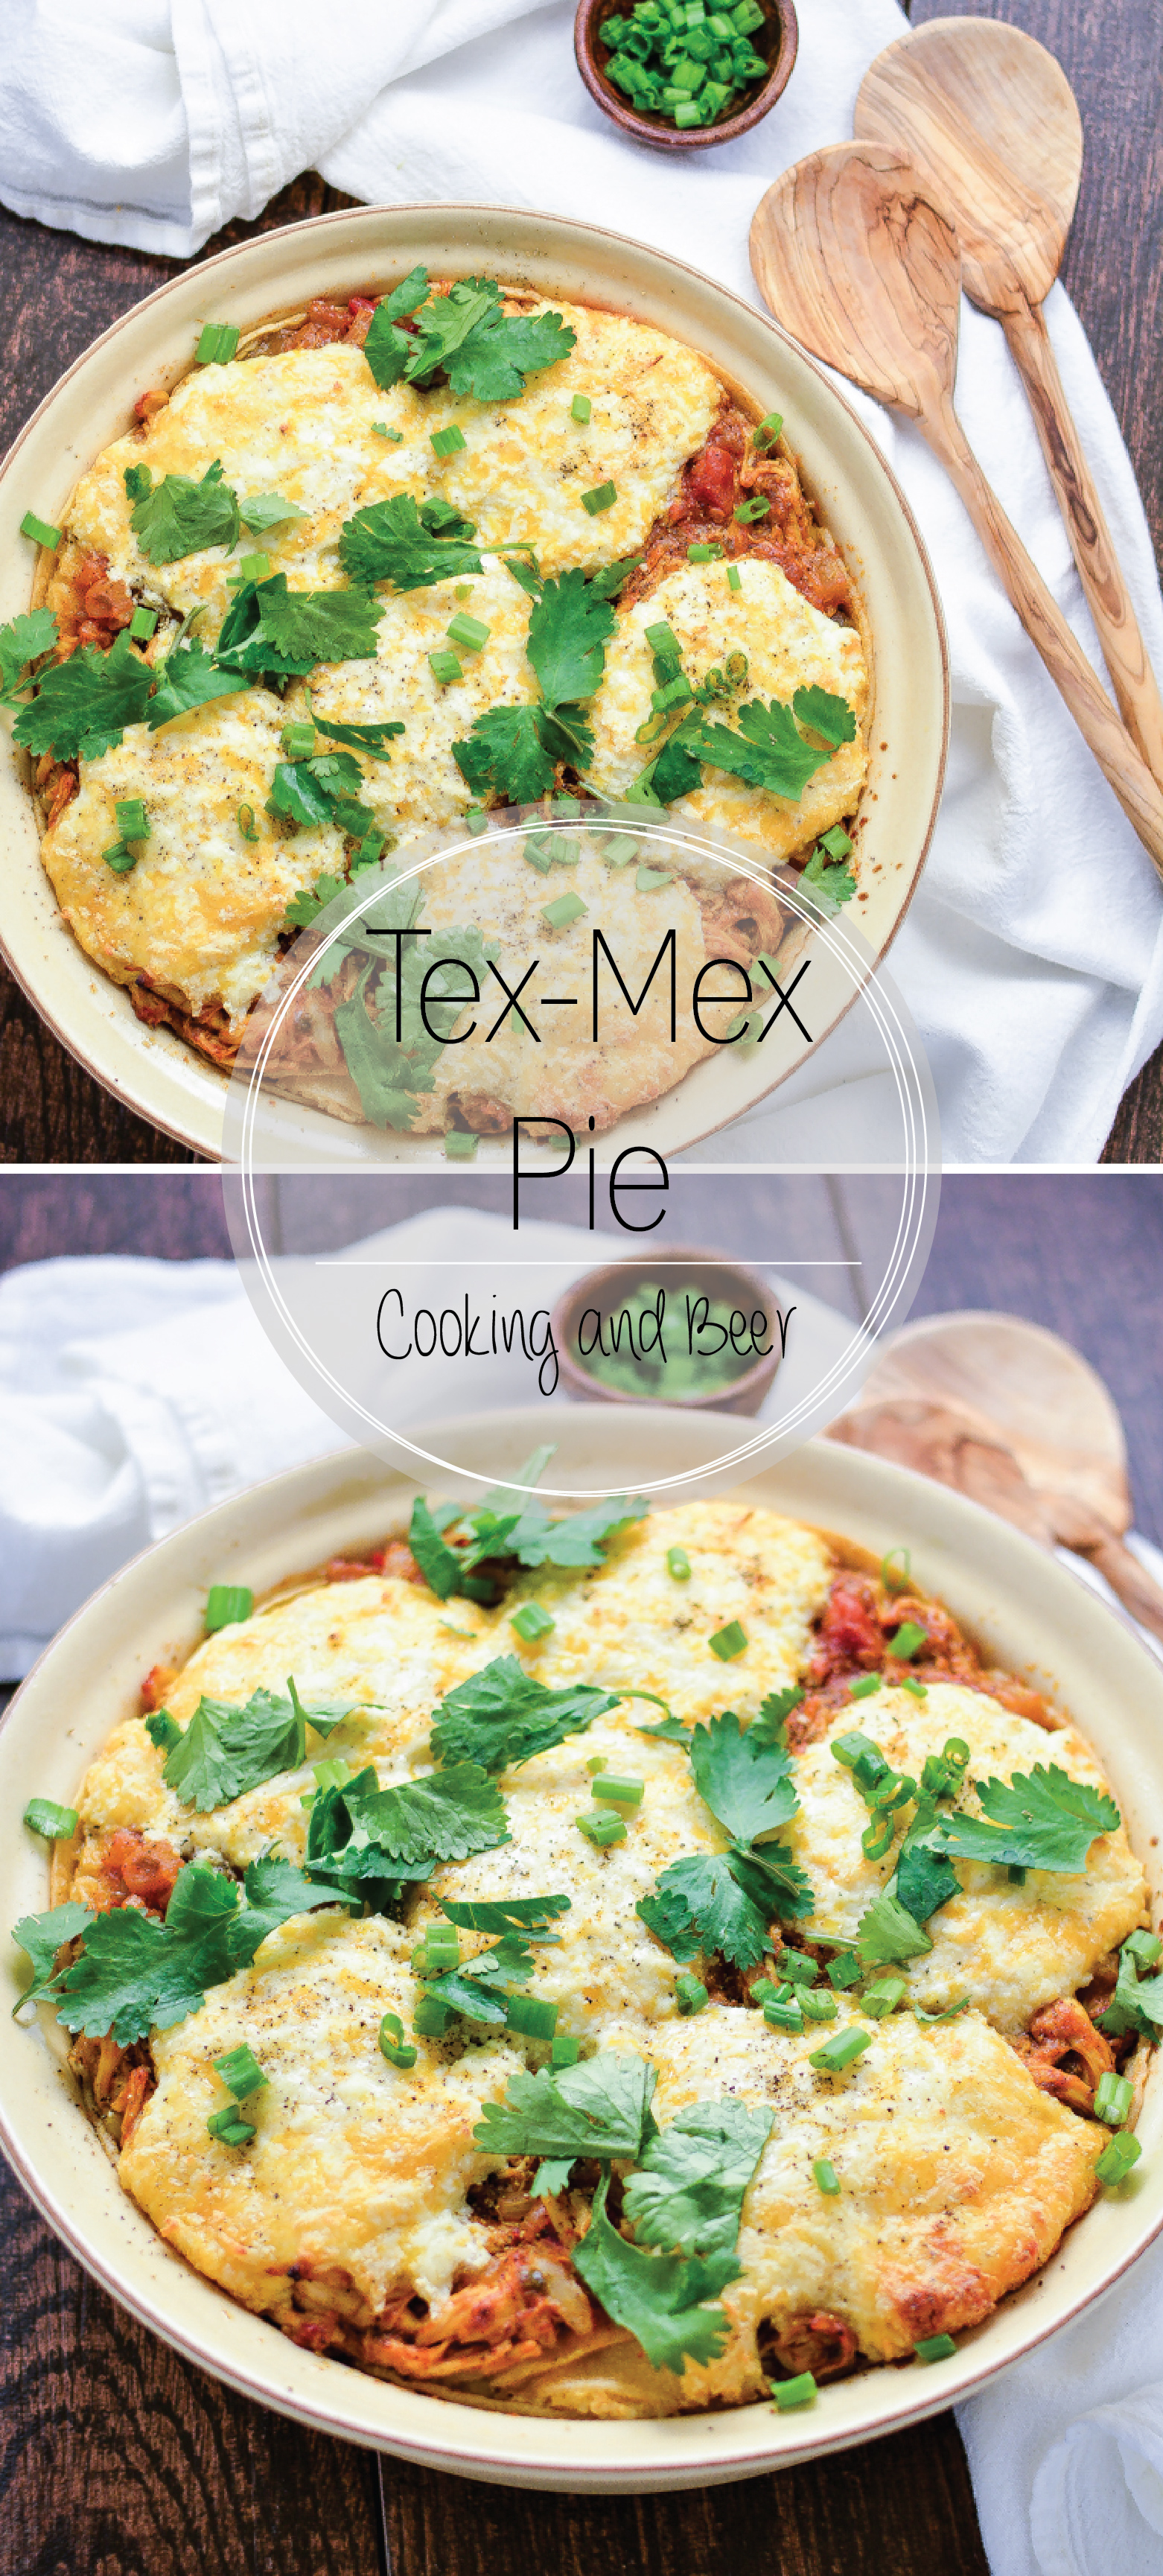 Tex-Mex Pie is a savory pie that is loaded with spicy flavor and is perfect for a weeknight meal!